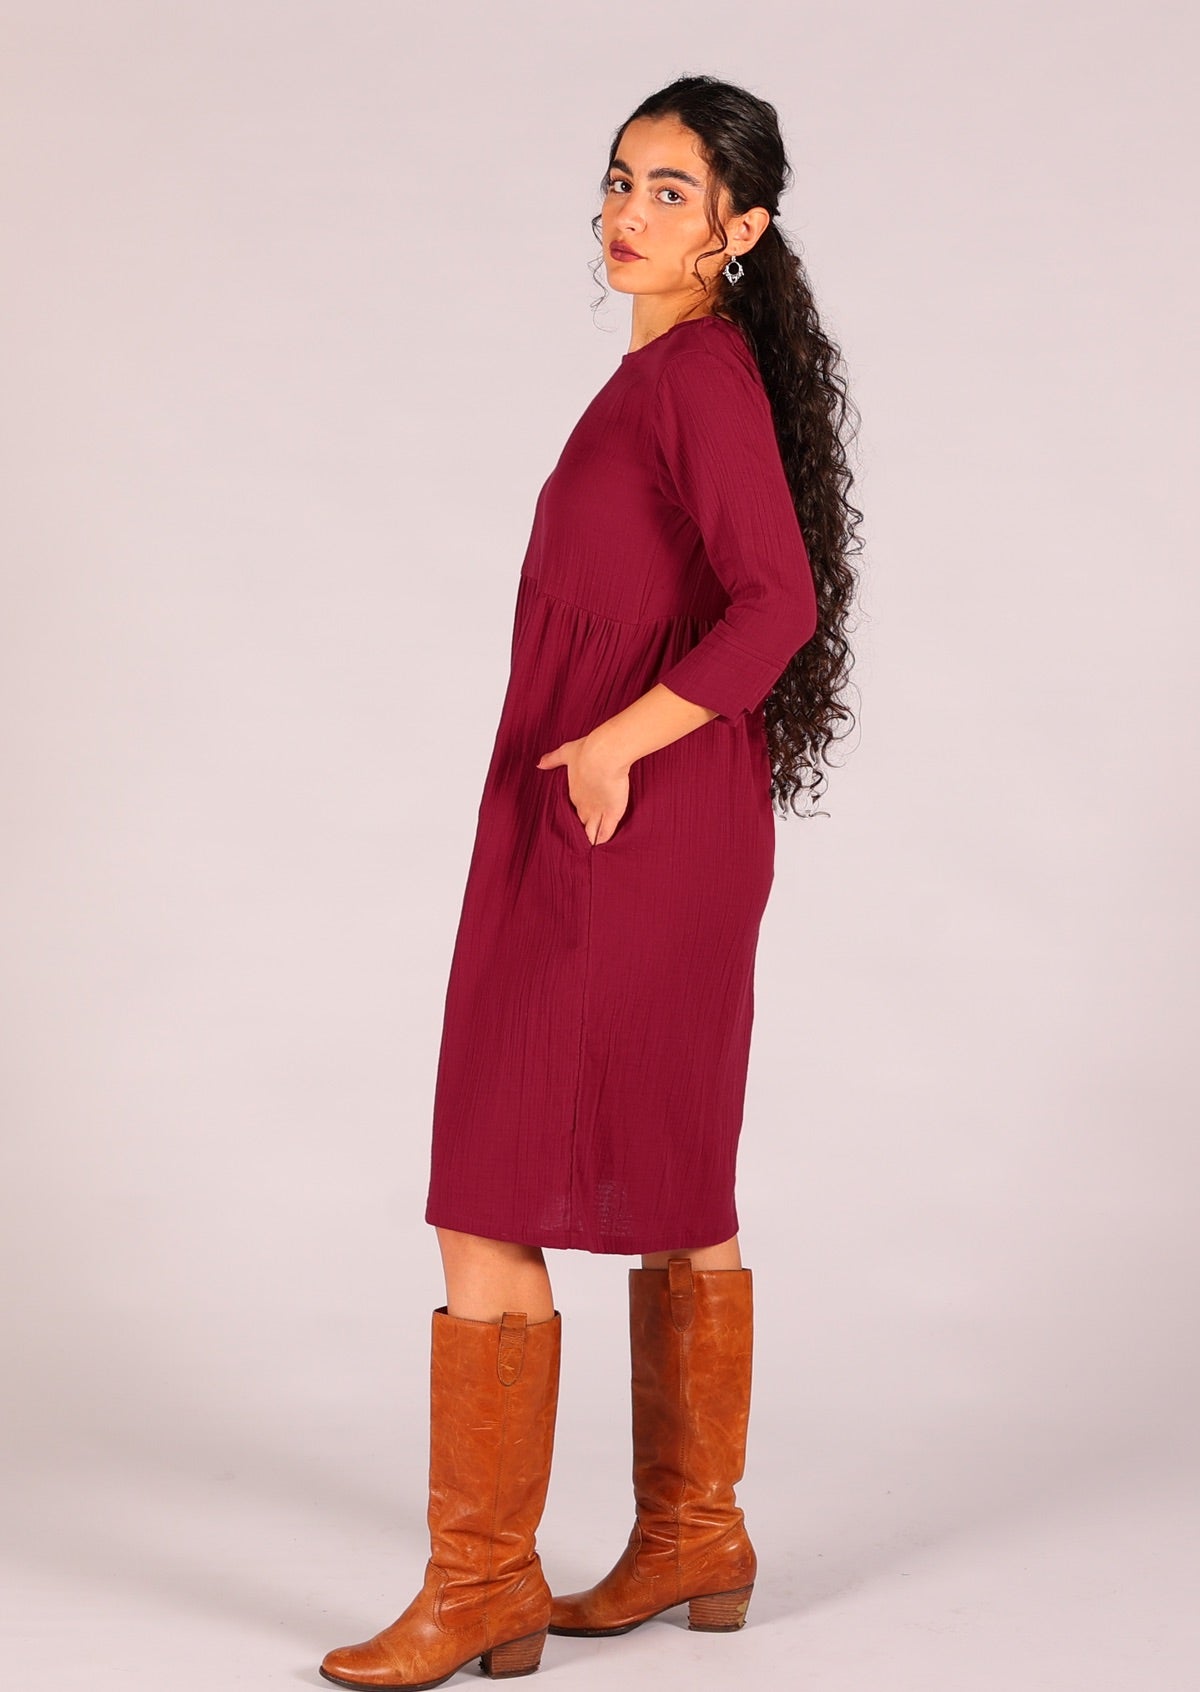 Relaxed fit dress in deep red made form two layers of cotton gauze